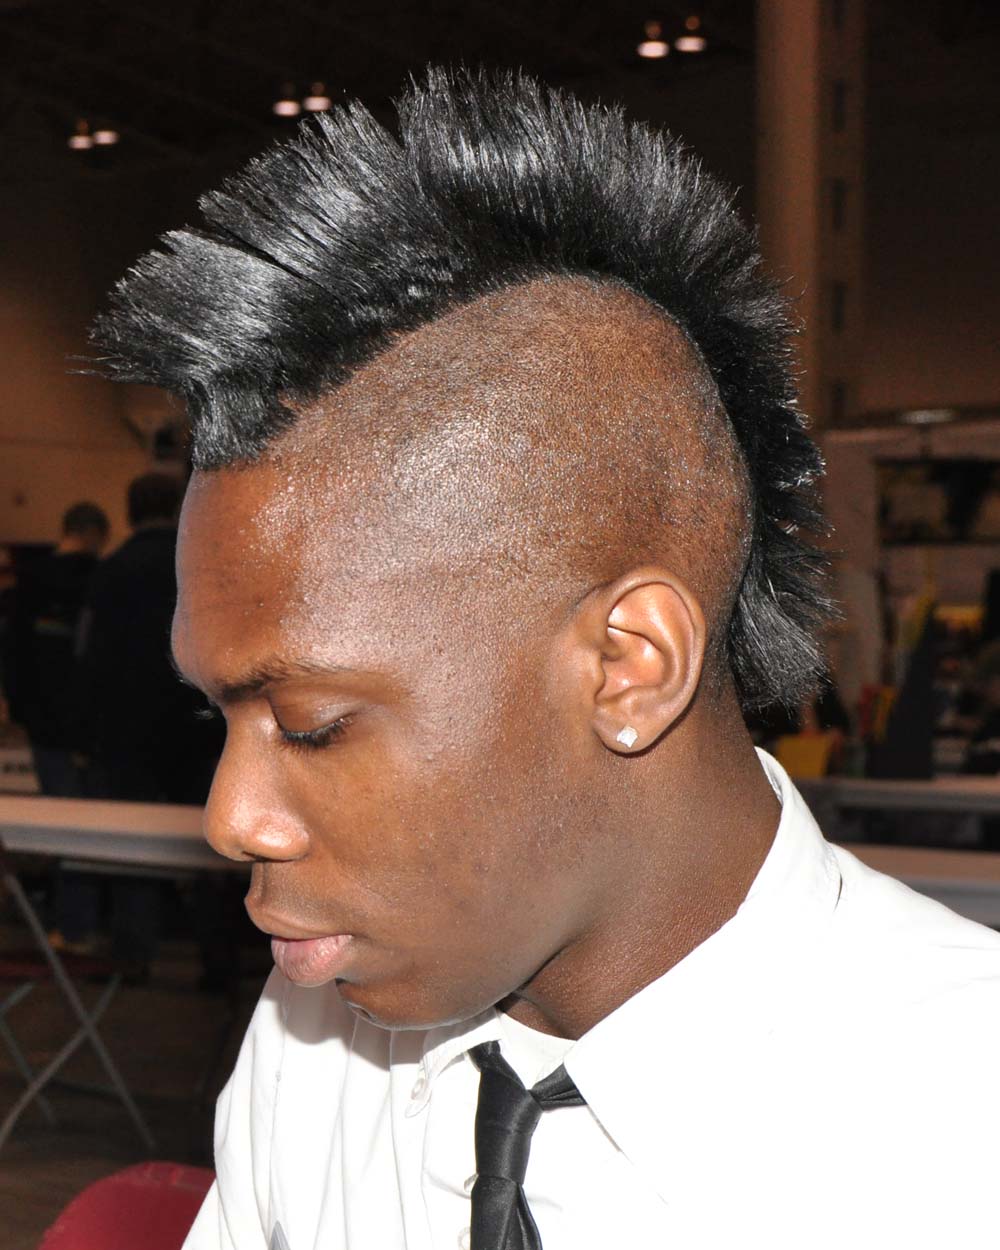 Mohawk Hairstyles, Long Hairstyle 2011, Hairstyle 2011, New Long Hairstyle 2011, Celebrity Long Hairstyles 2045